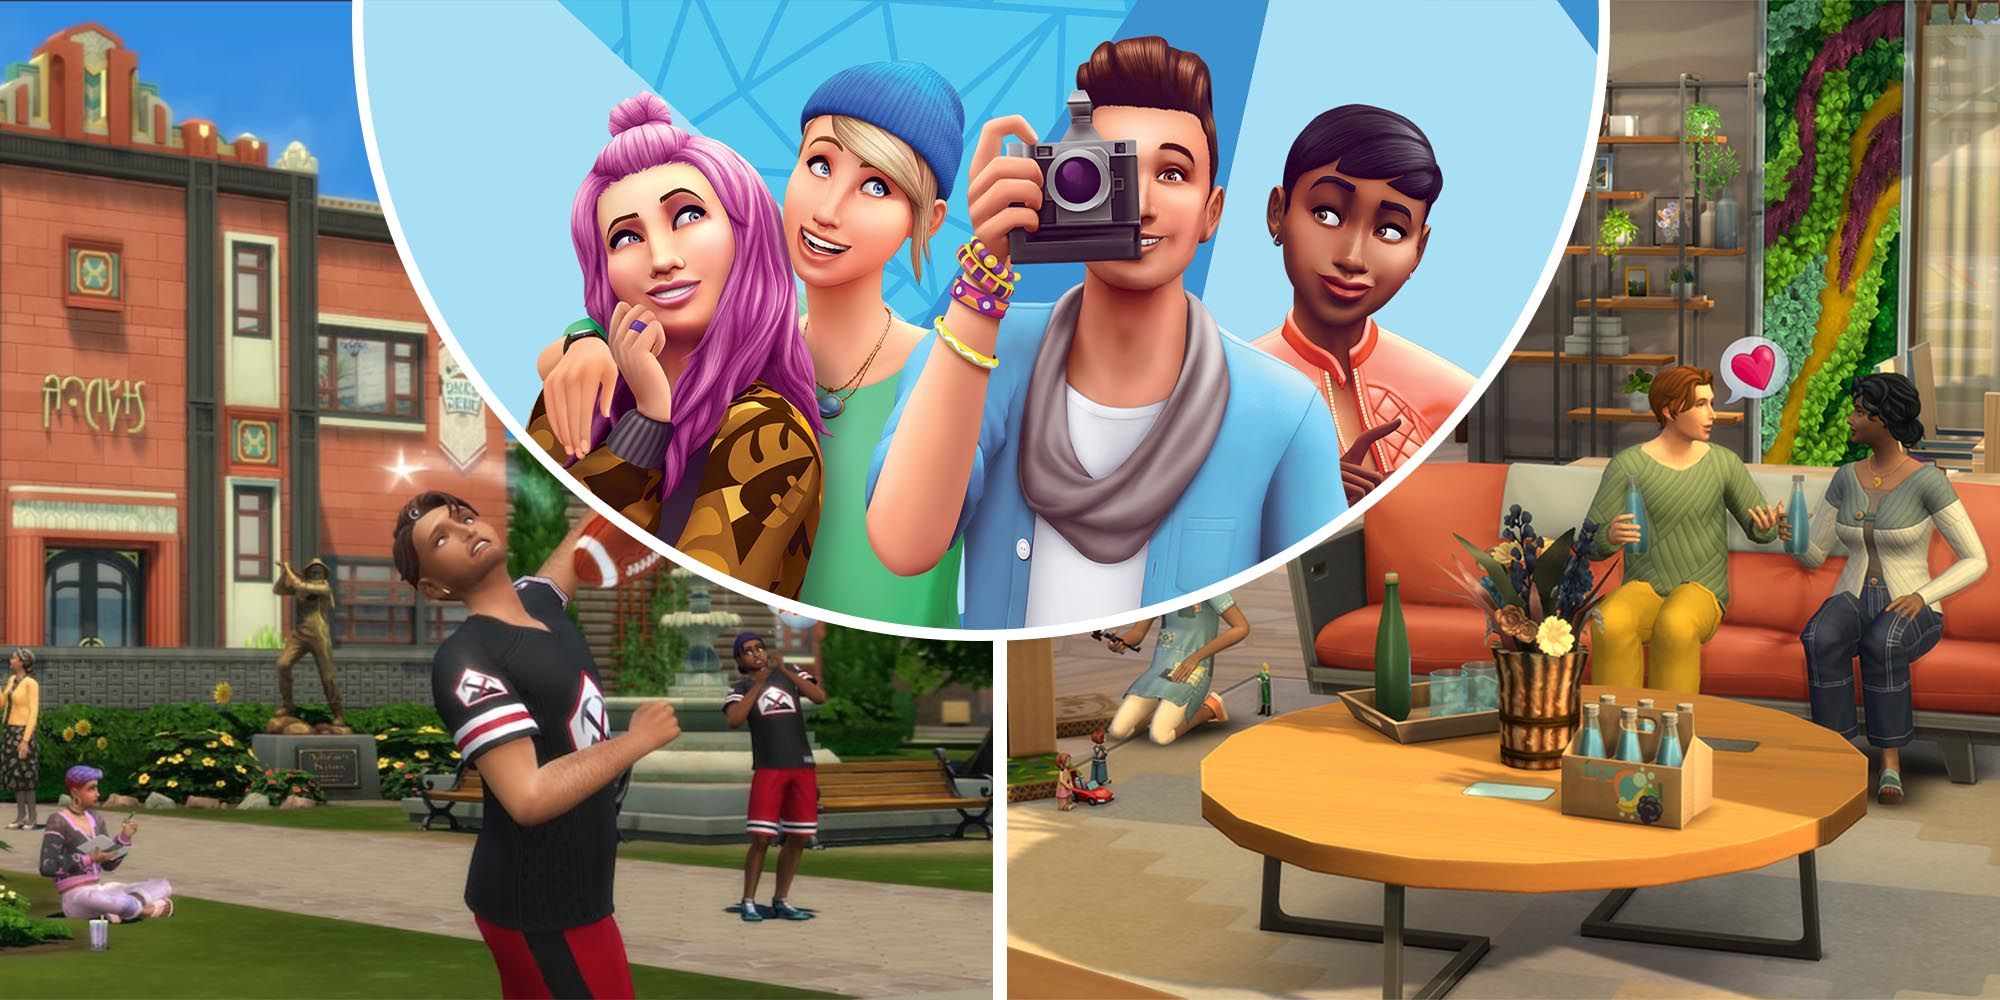 The Sims 4 Sims holding a camera and looking at each other